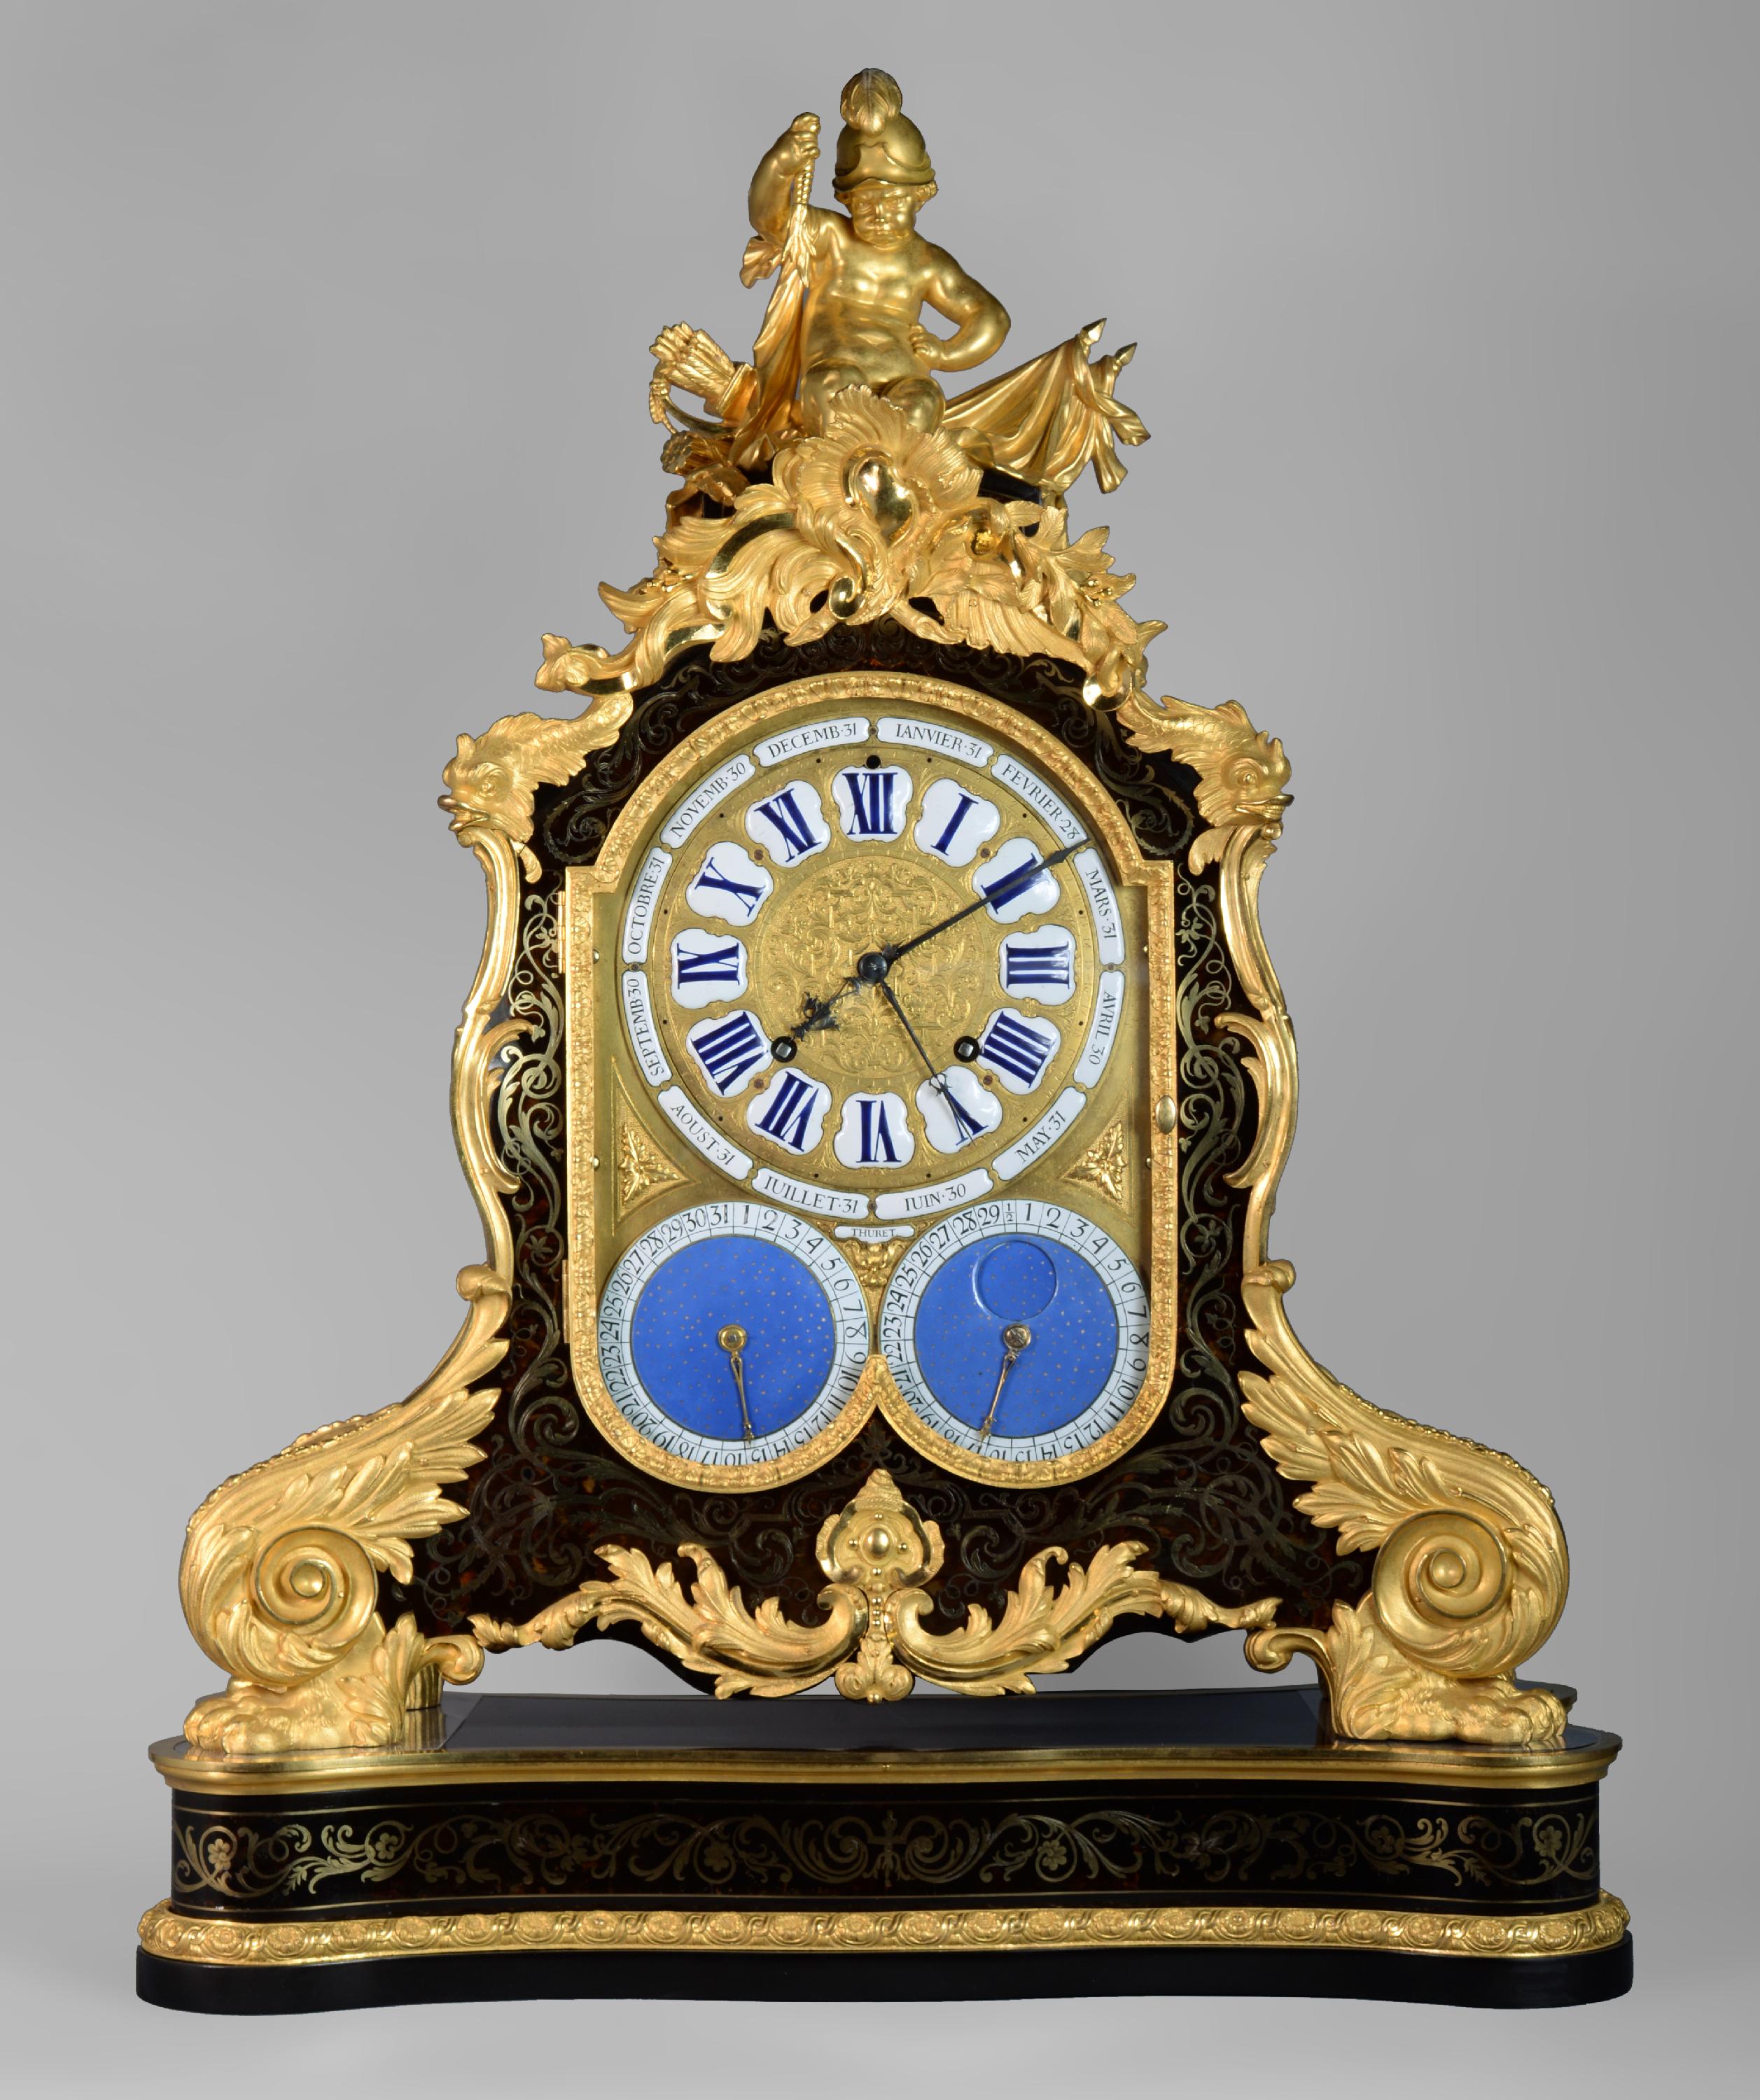 This exceptional cartel presents a remarkable work of bronze and an ornamentation resuming the Boulle marquetry that can be attributed to Alfred-Emmanuel Beurdeley (1847-1919), a great Parisian cabinetmaker of the second half of the 19th century.